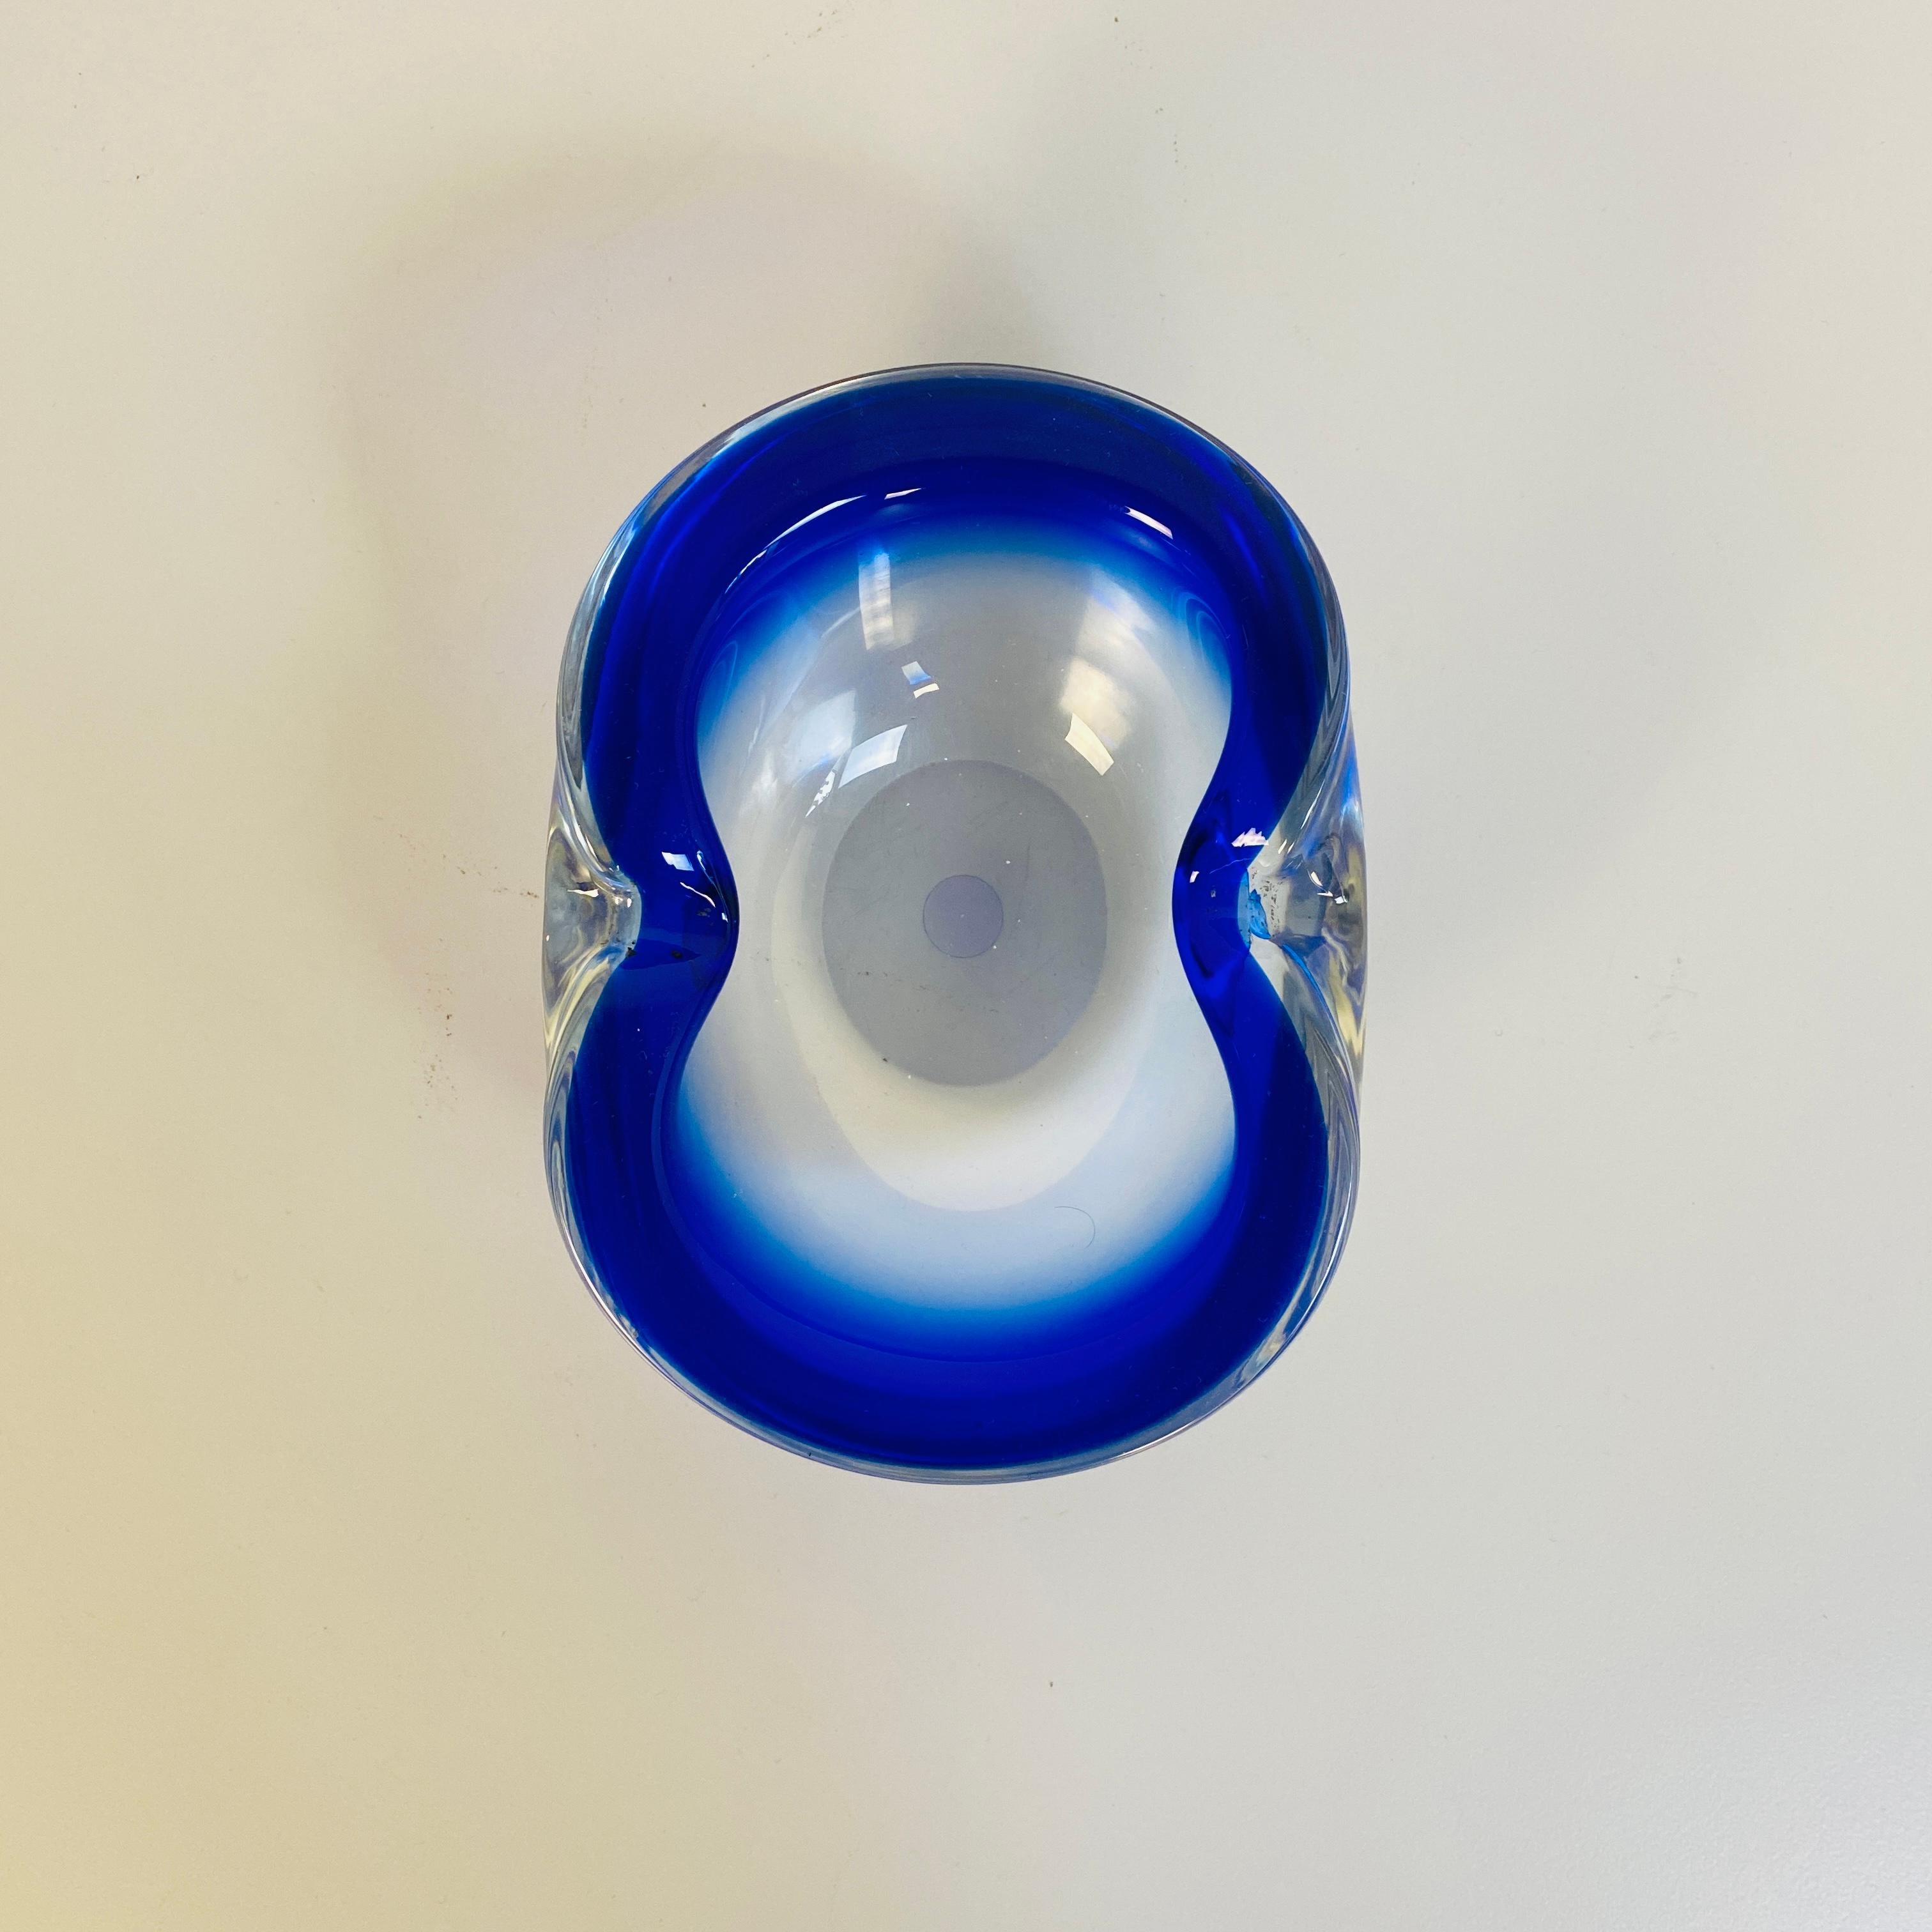 Italian Mid-Century Modern Murano Glass Oval Object Holder in Blue, 1970s For Sale 1